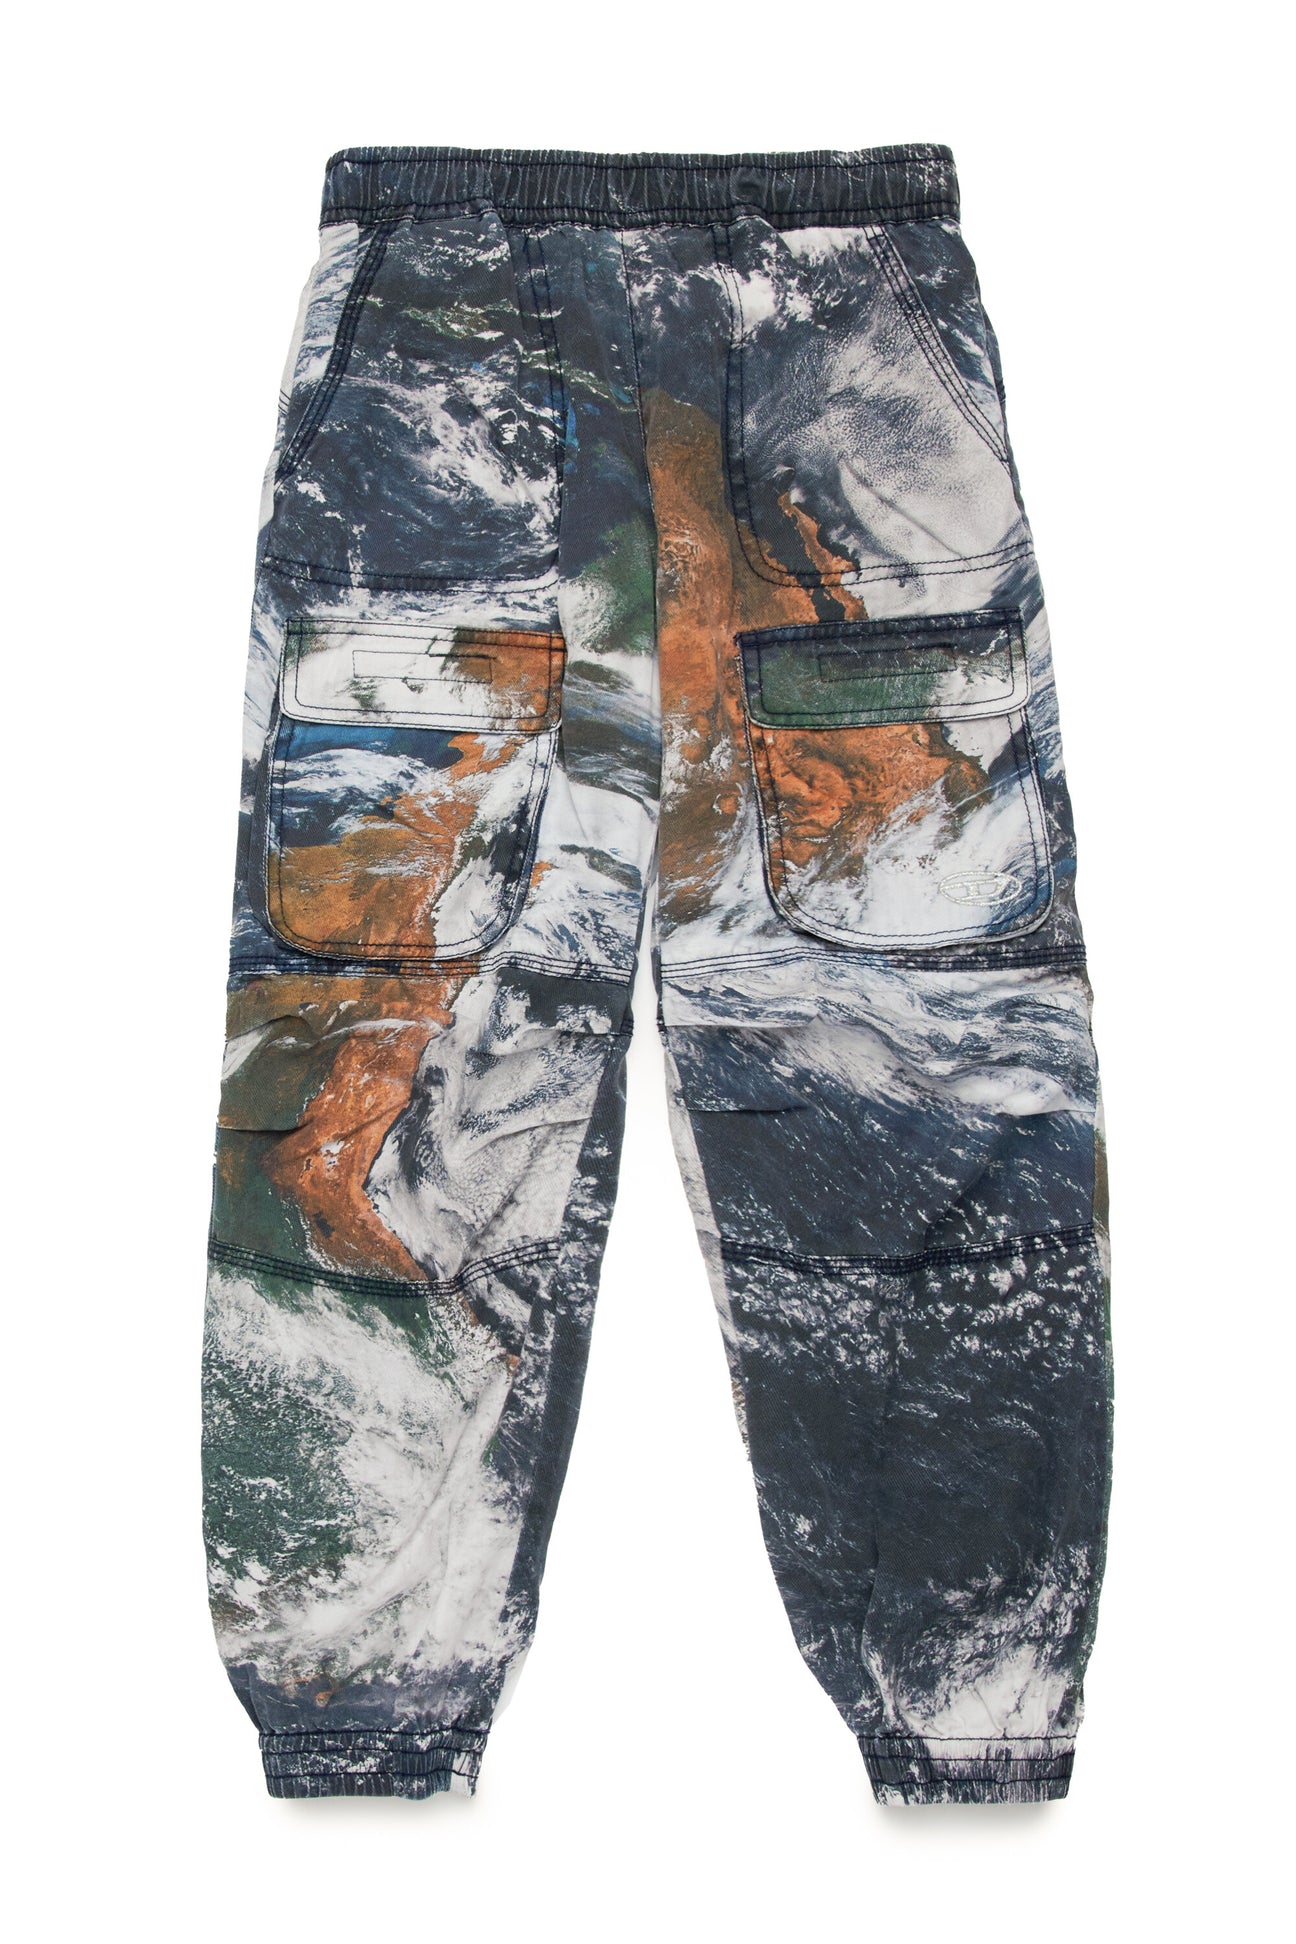 All-over Planet Camou cargo trousers All-over Planet Camou cargo trousers